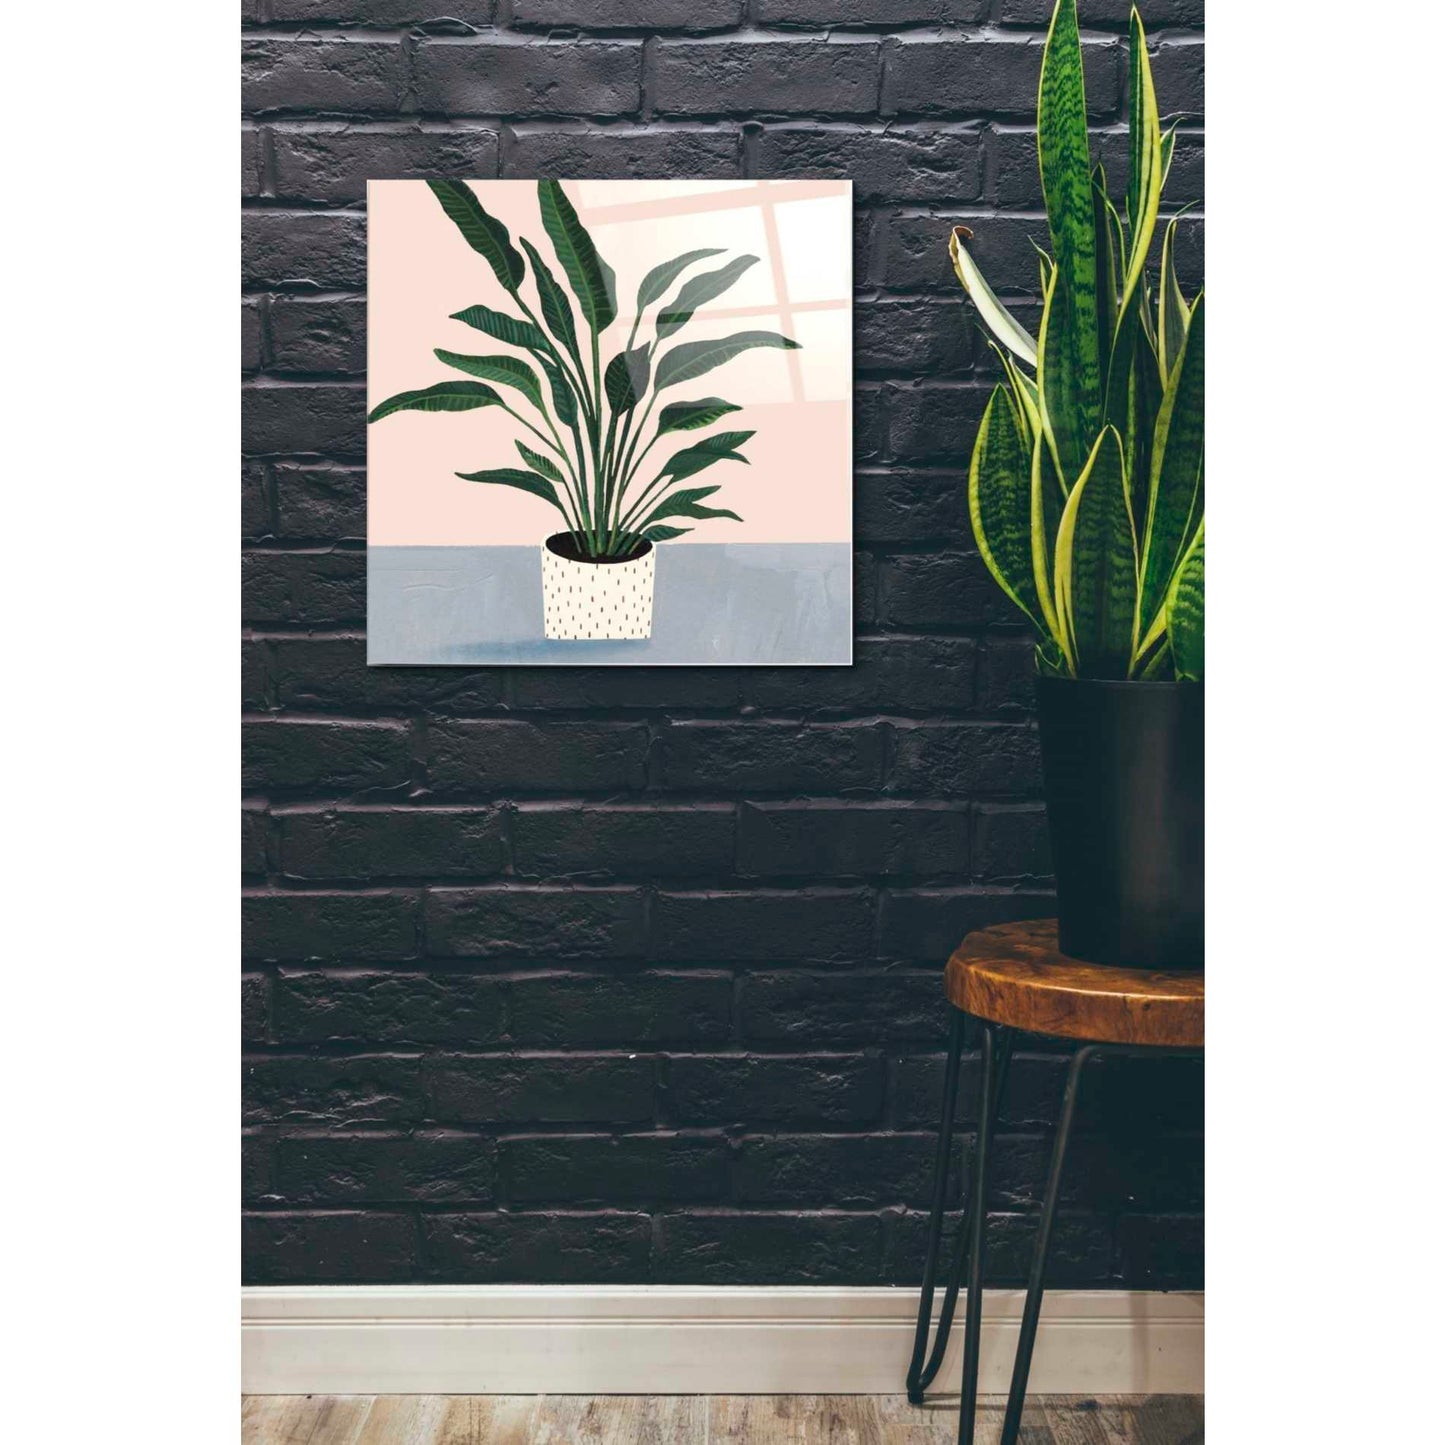 Epic Art 'Houseplant IV' by Victoria Borges Acrylic Glass Wall Art,24x24